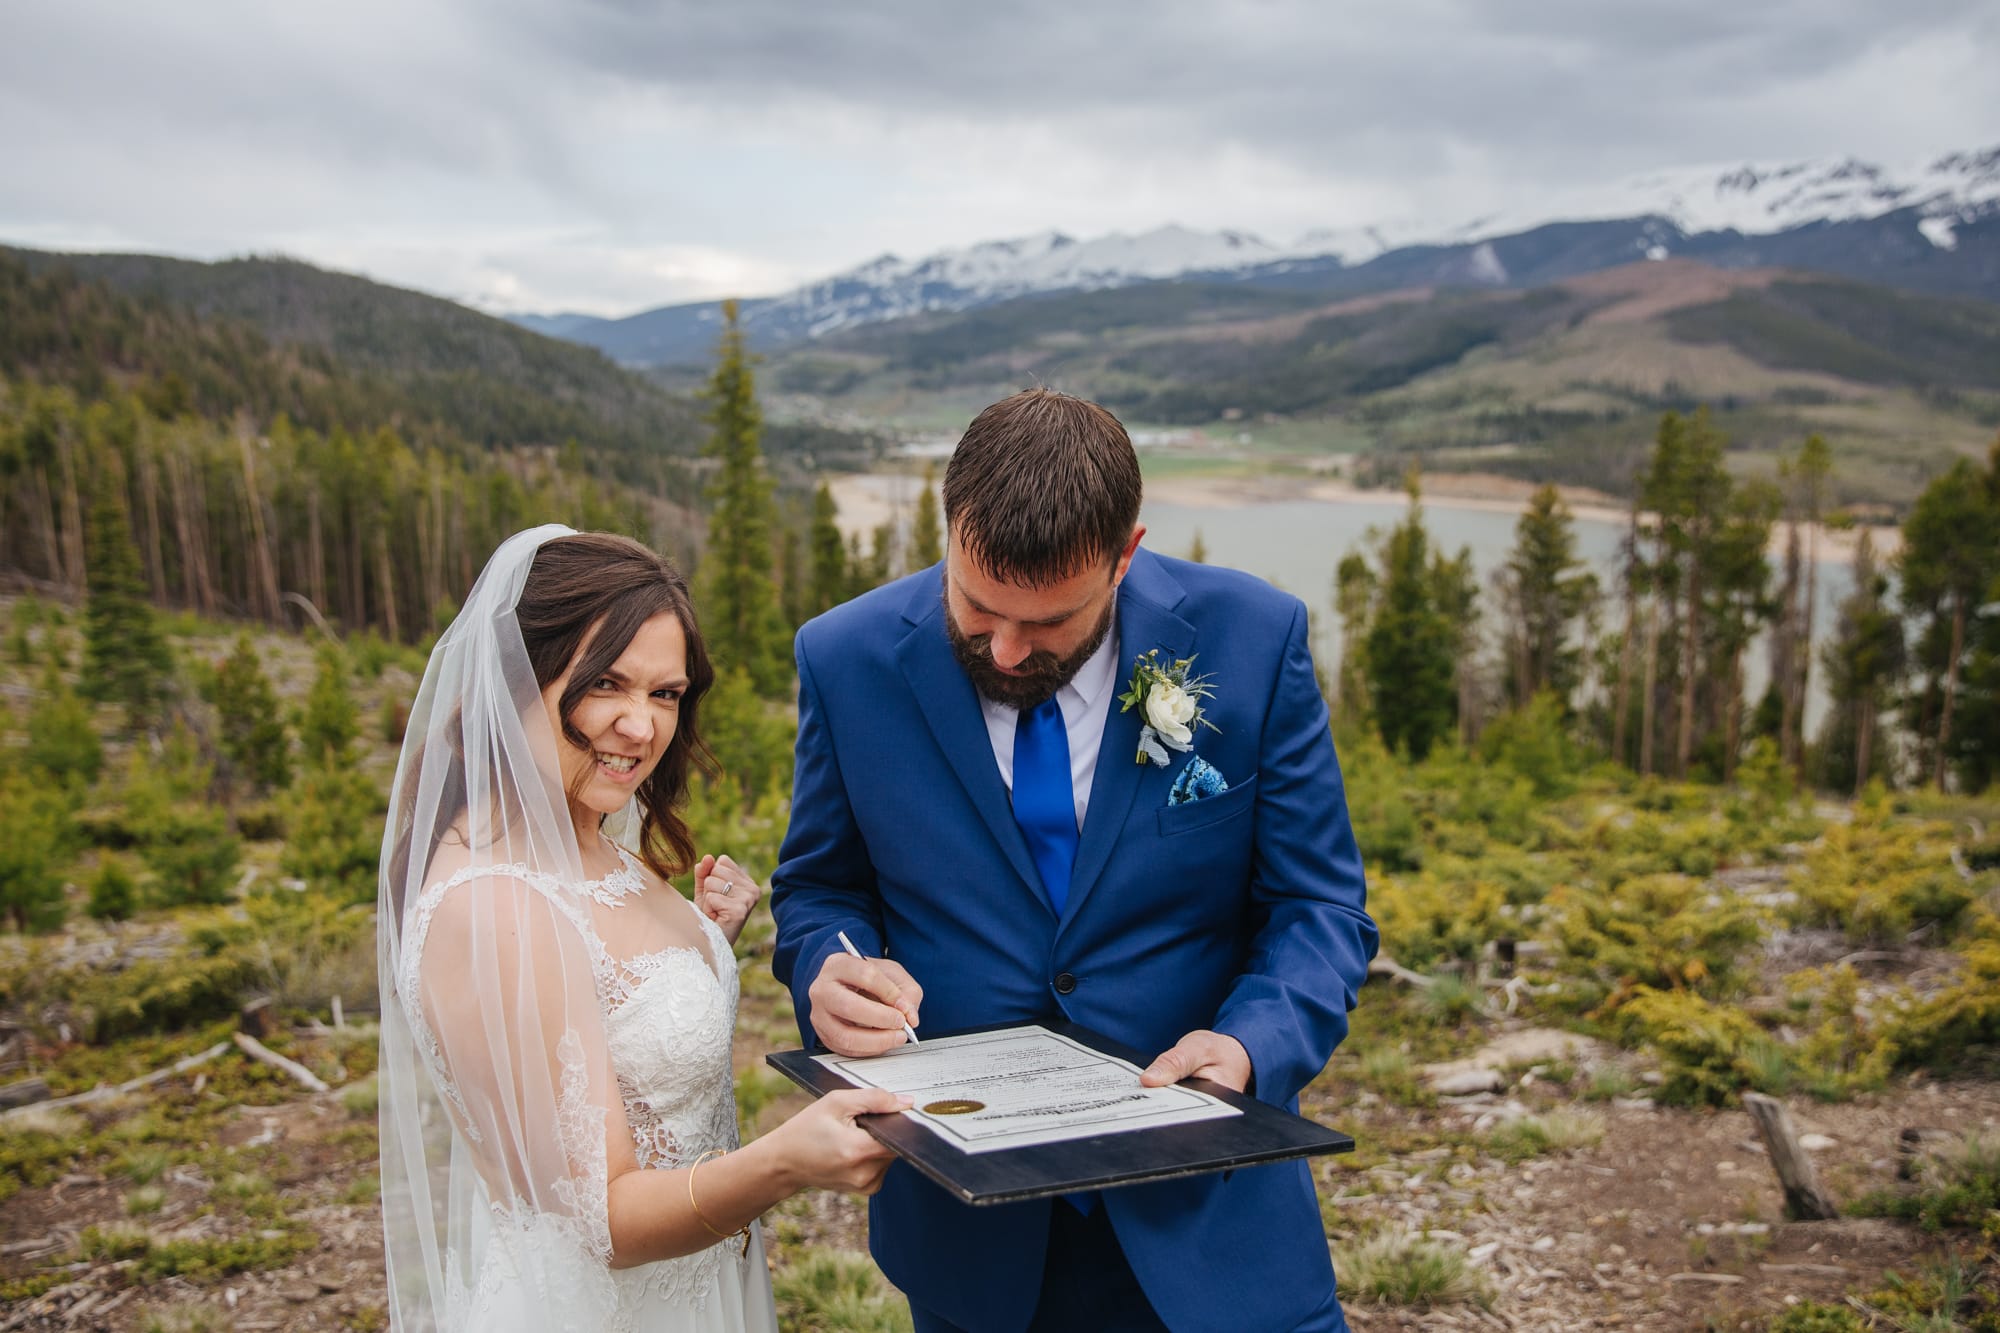 sapphire point colorado, signing marriage license, marriage license signing, frisco wedding, frisco wedding photographer, colorado wedding photographer, intimate wedding, scenic wedding, mountain wedding, bride celebrating after ceremony, groom signing marriage license, funny wedding photos